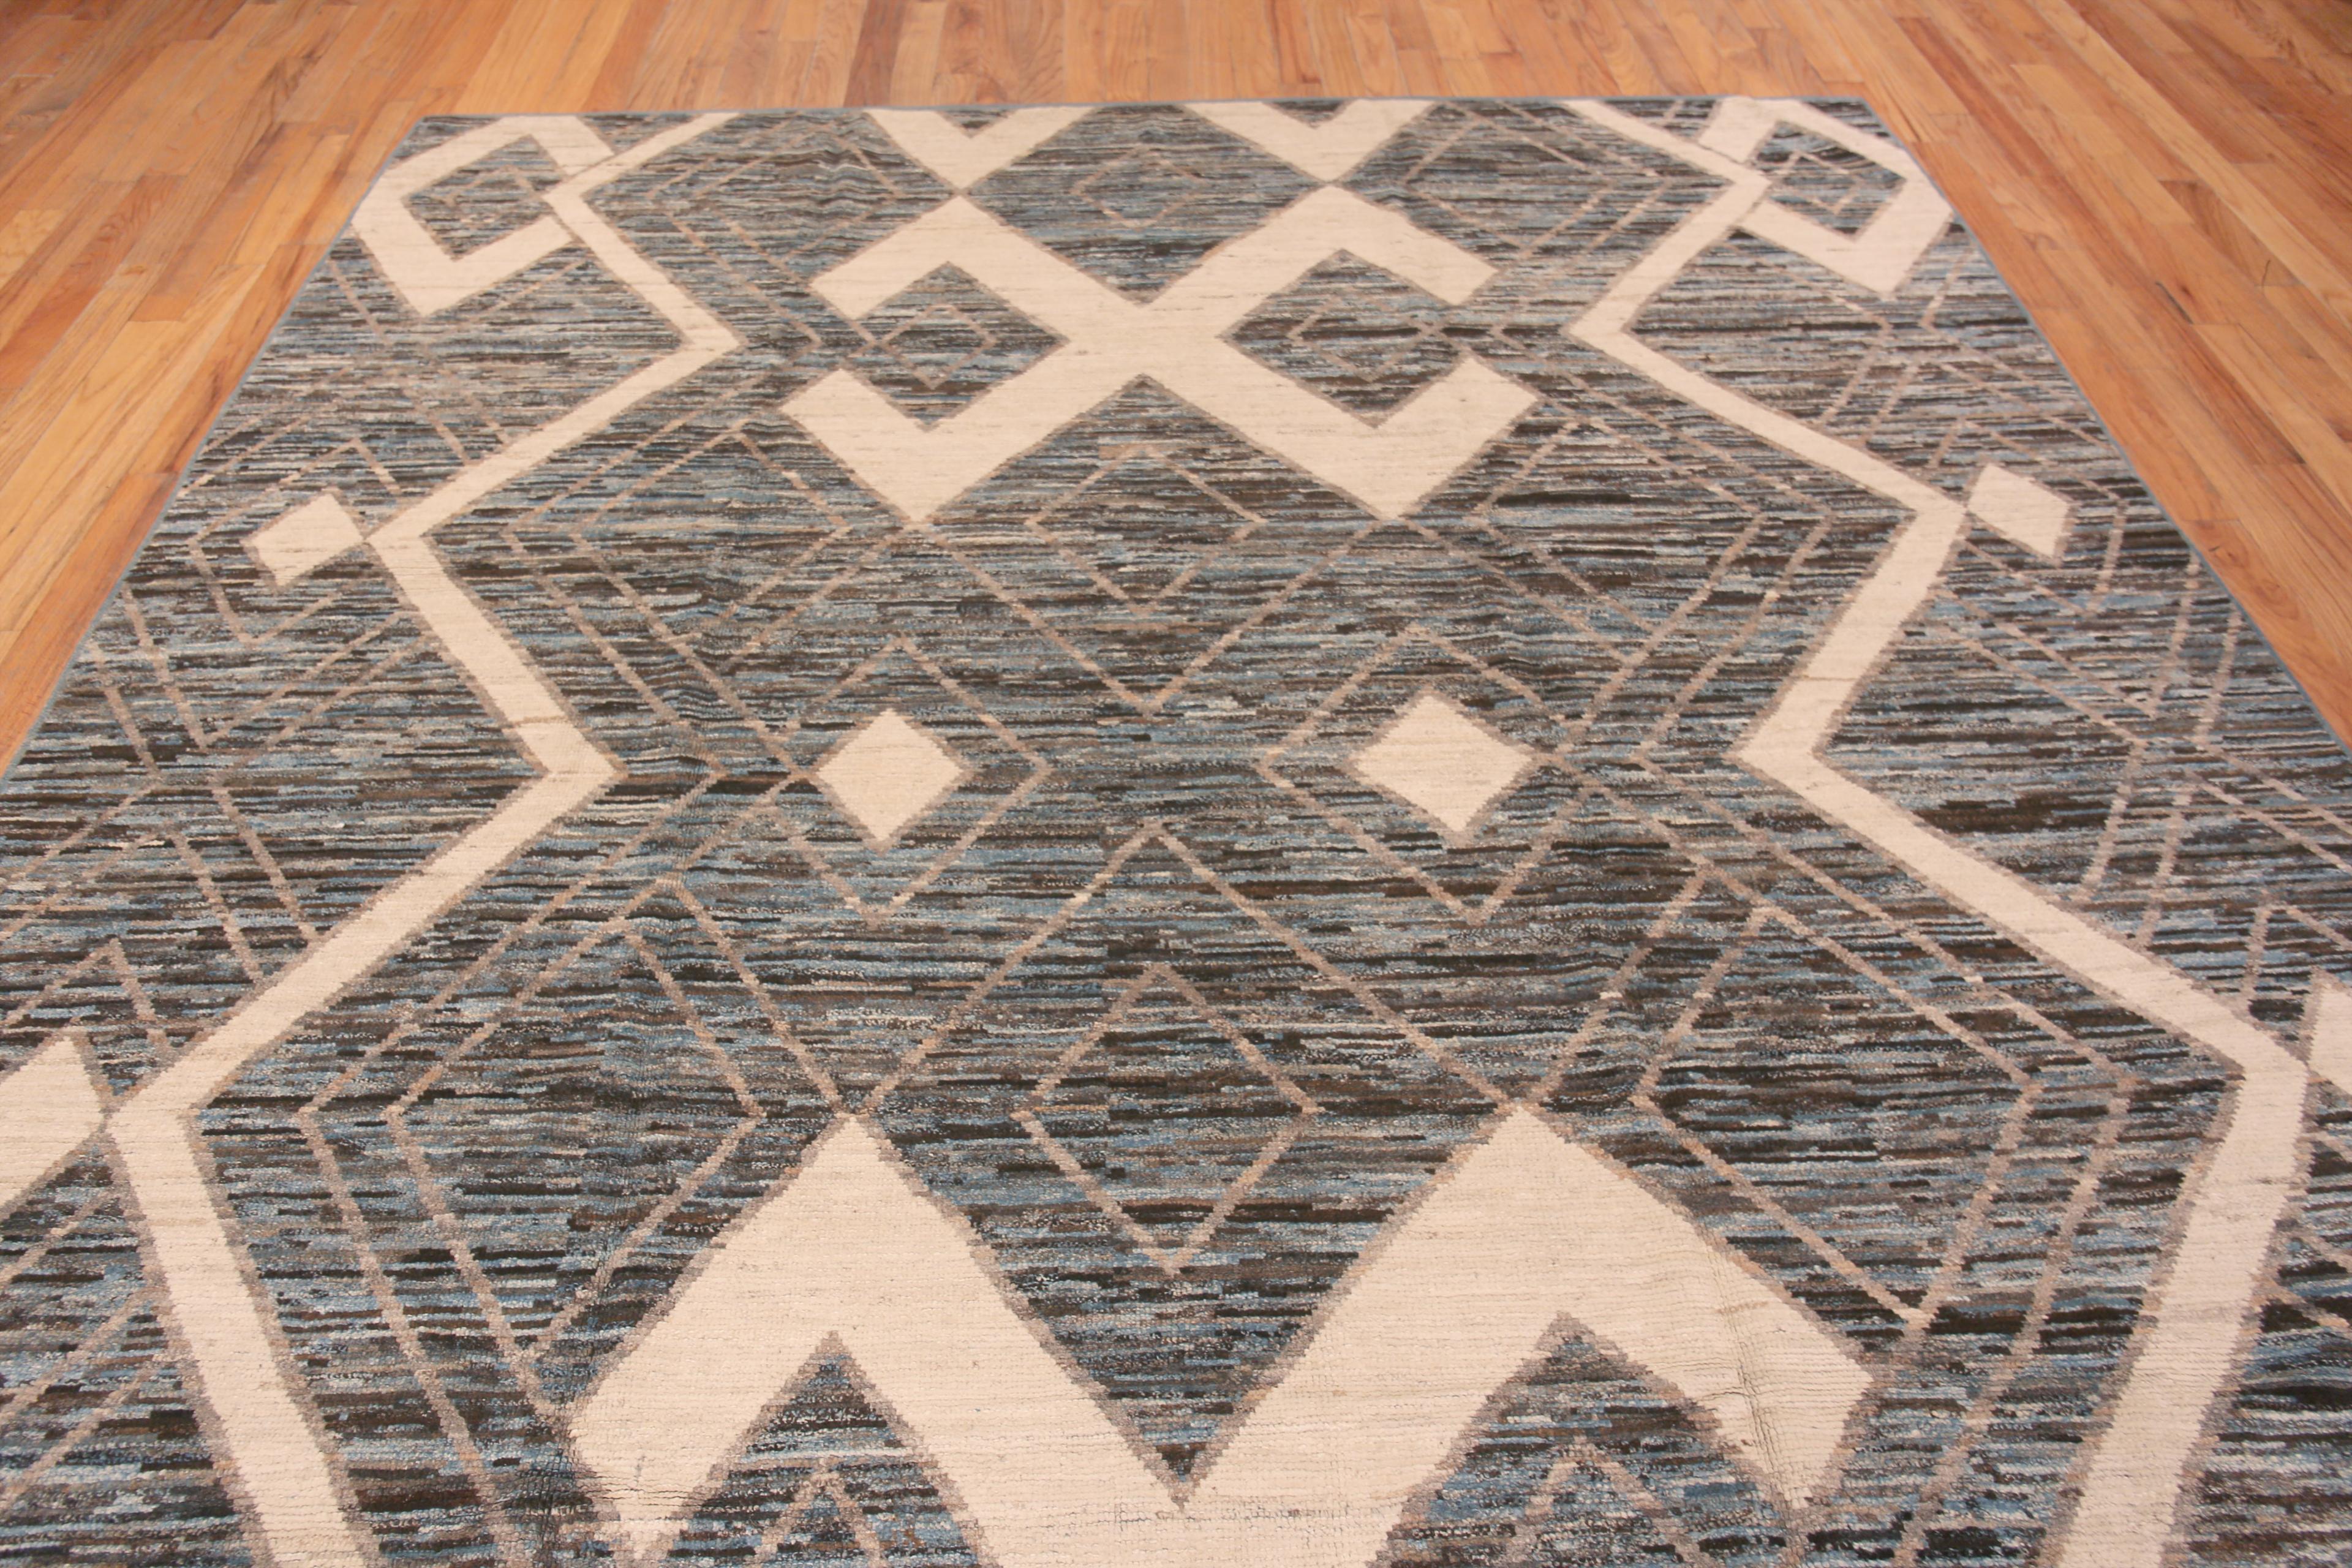 A Captivating Artistic Tribal Geometric Design Grounding Earthy Color Room Size Modern Contemporary Area Rug, Country Of Origin: Central Asia, Circa Date: Modern Rug 